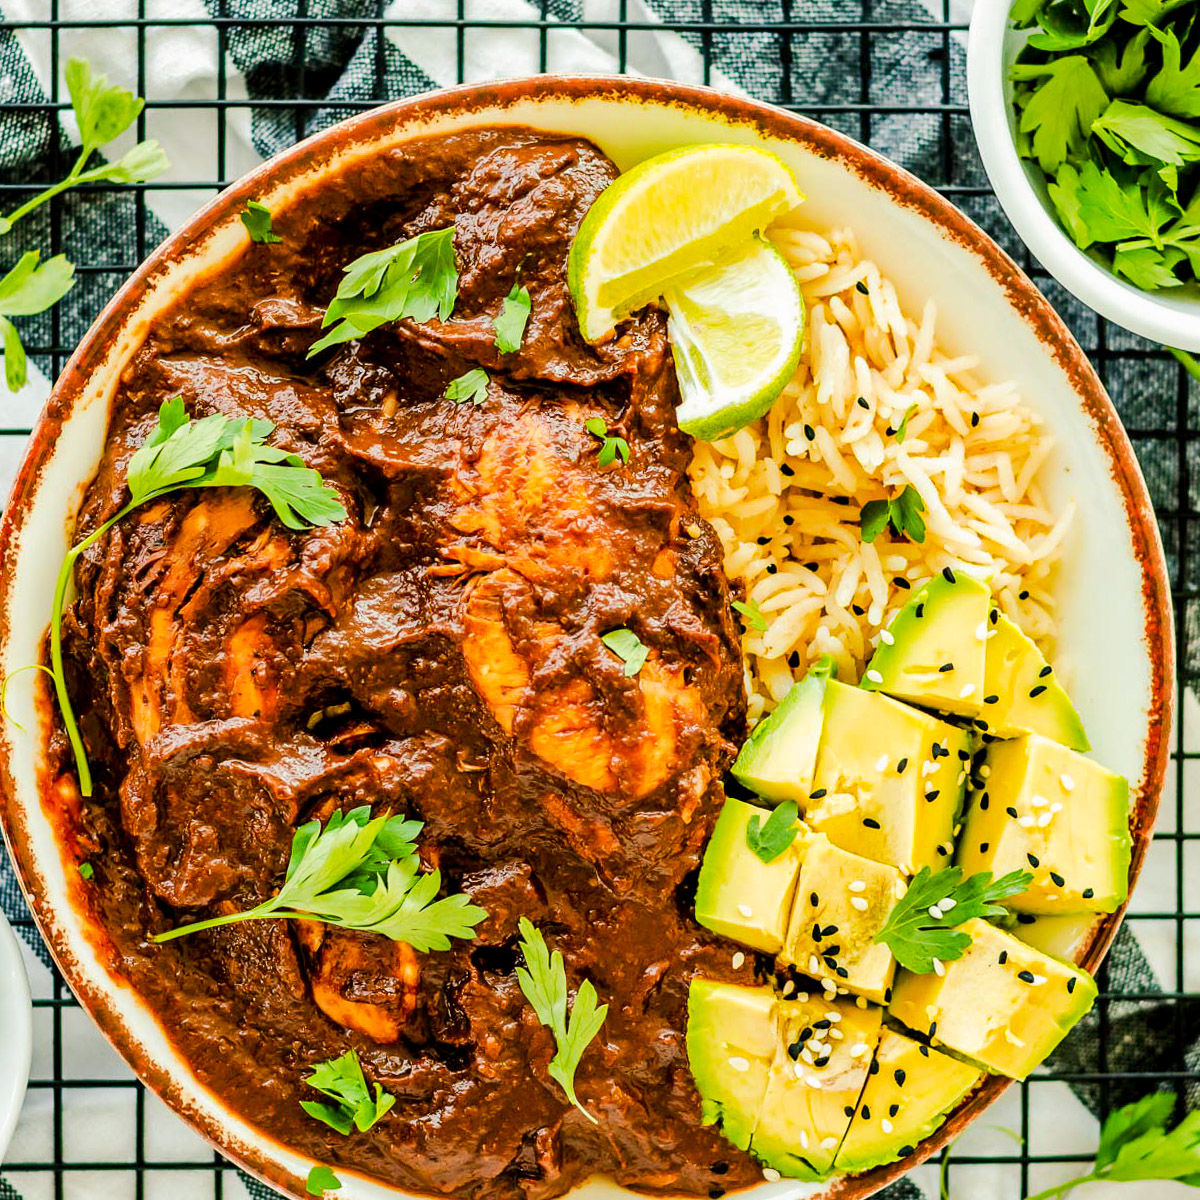 plate of chicken with mole sauce with rice and avocado